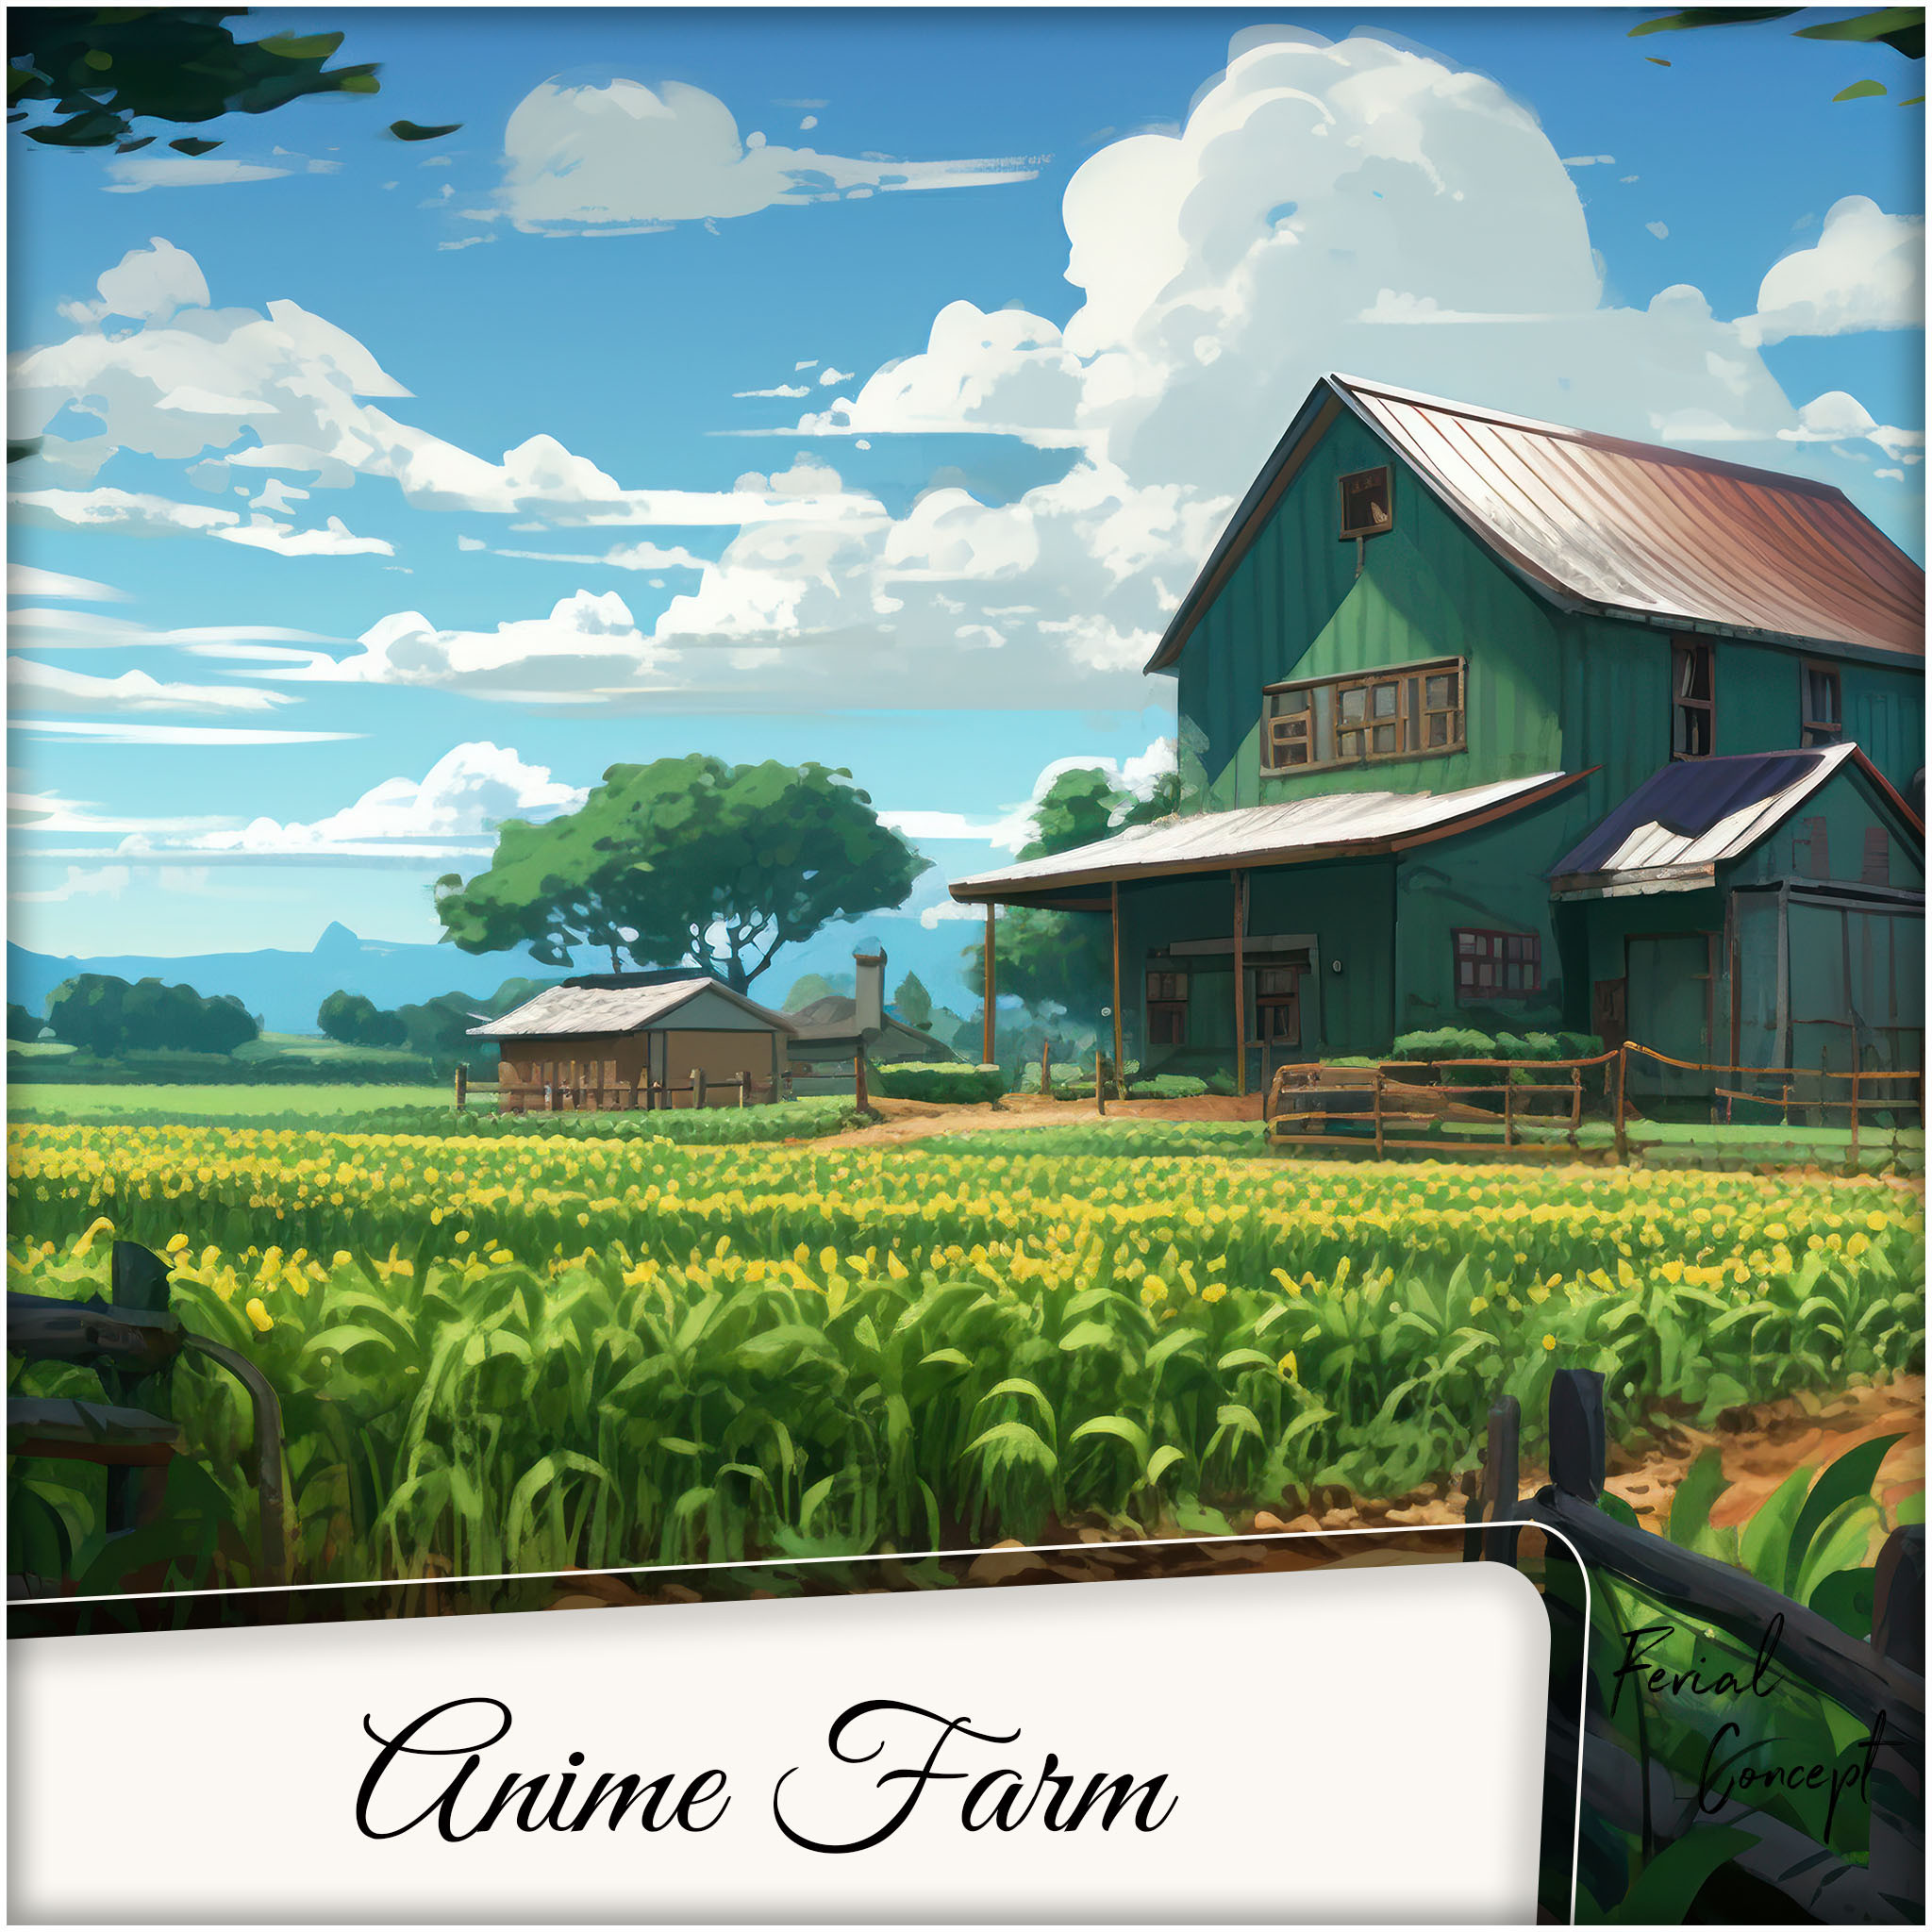 Top 8 Amazing Anime About Farming and Agriculture | Gamers Discussion Hub